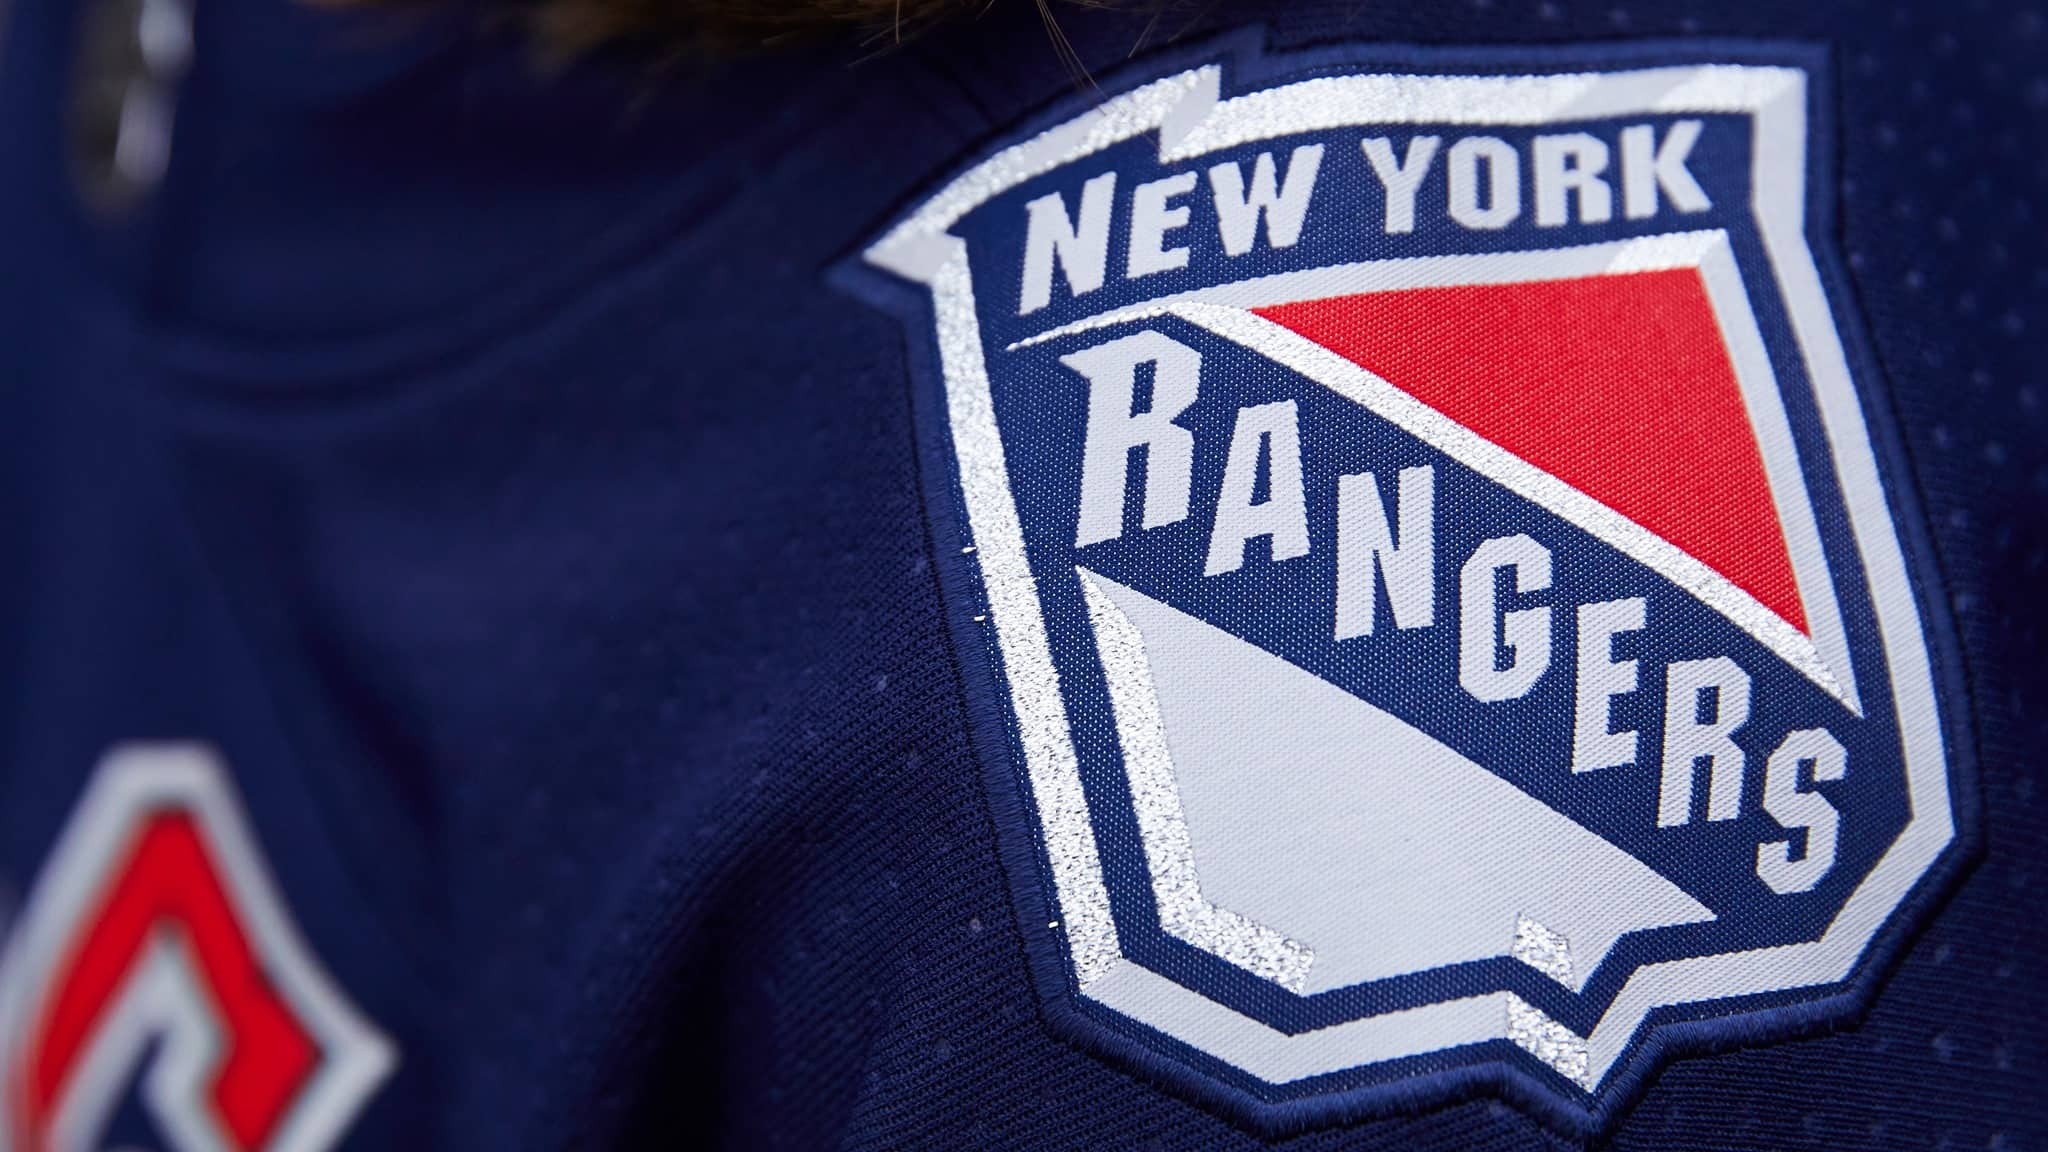 Lady Liberty Returns: Reaction to the Rangers Reverse Retro Jersey